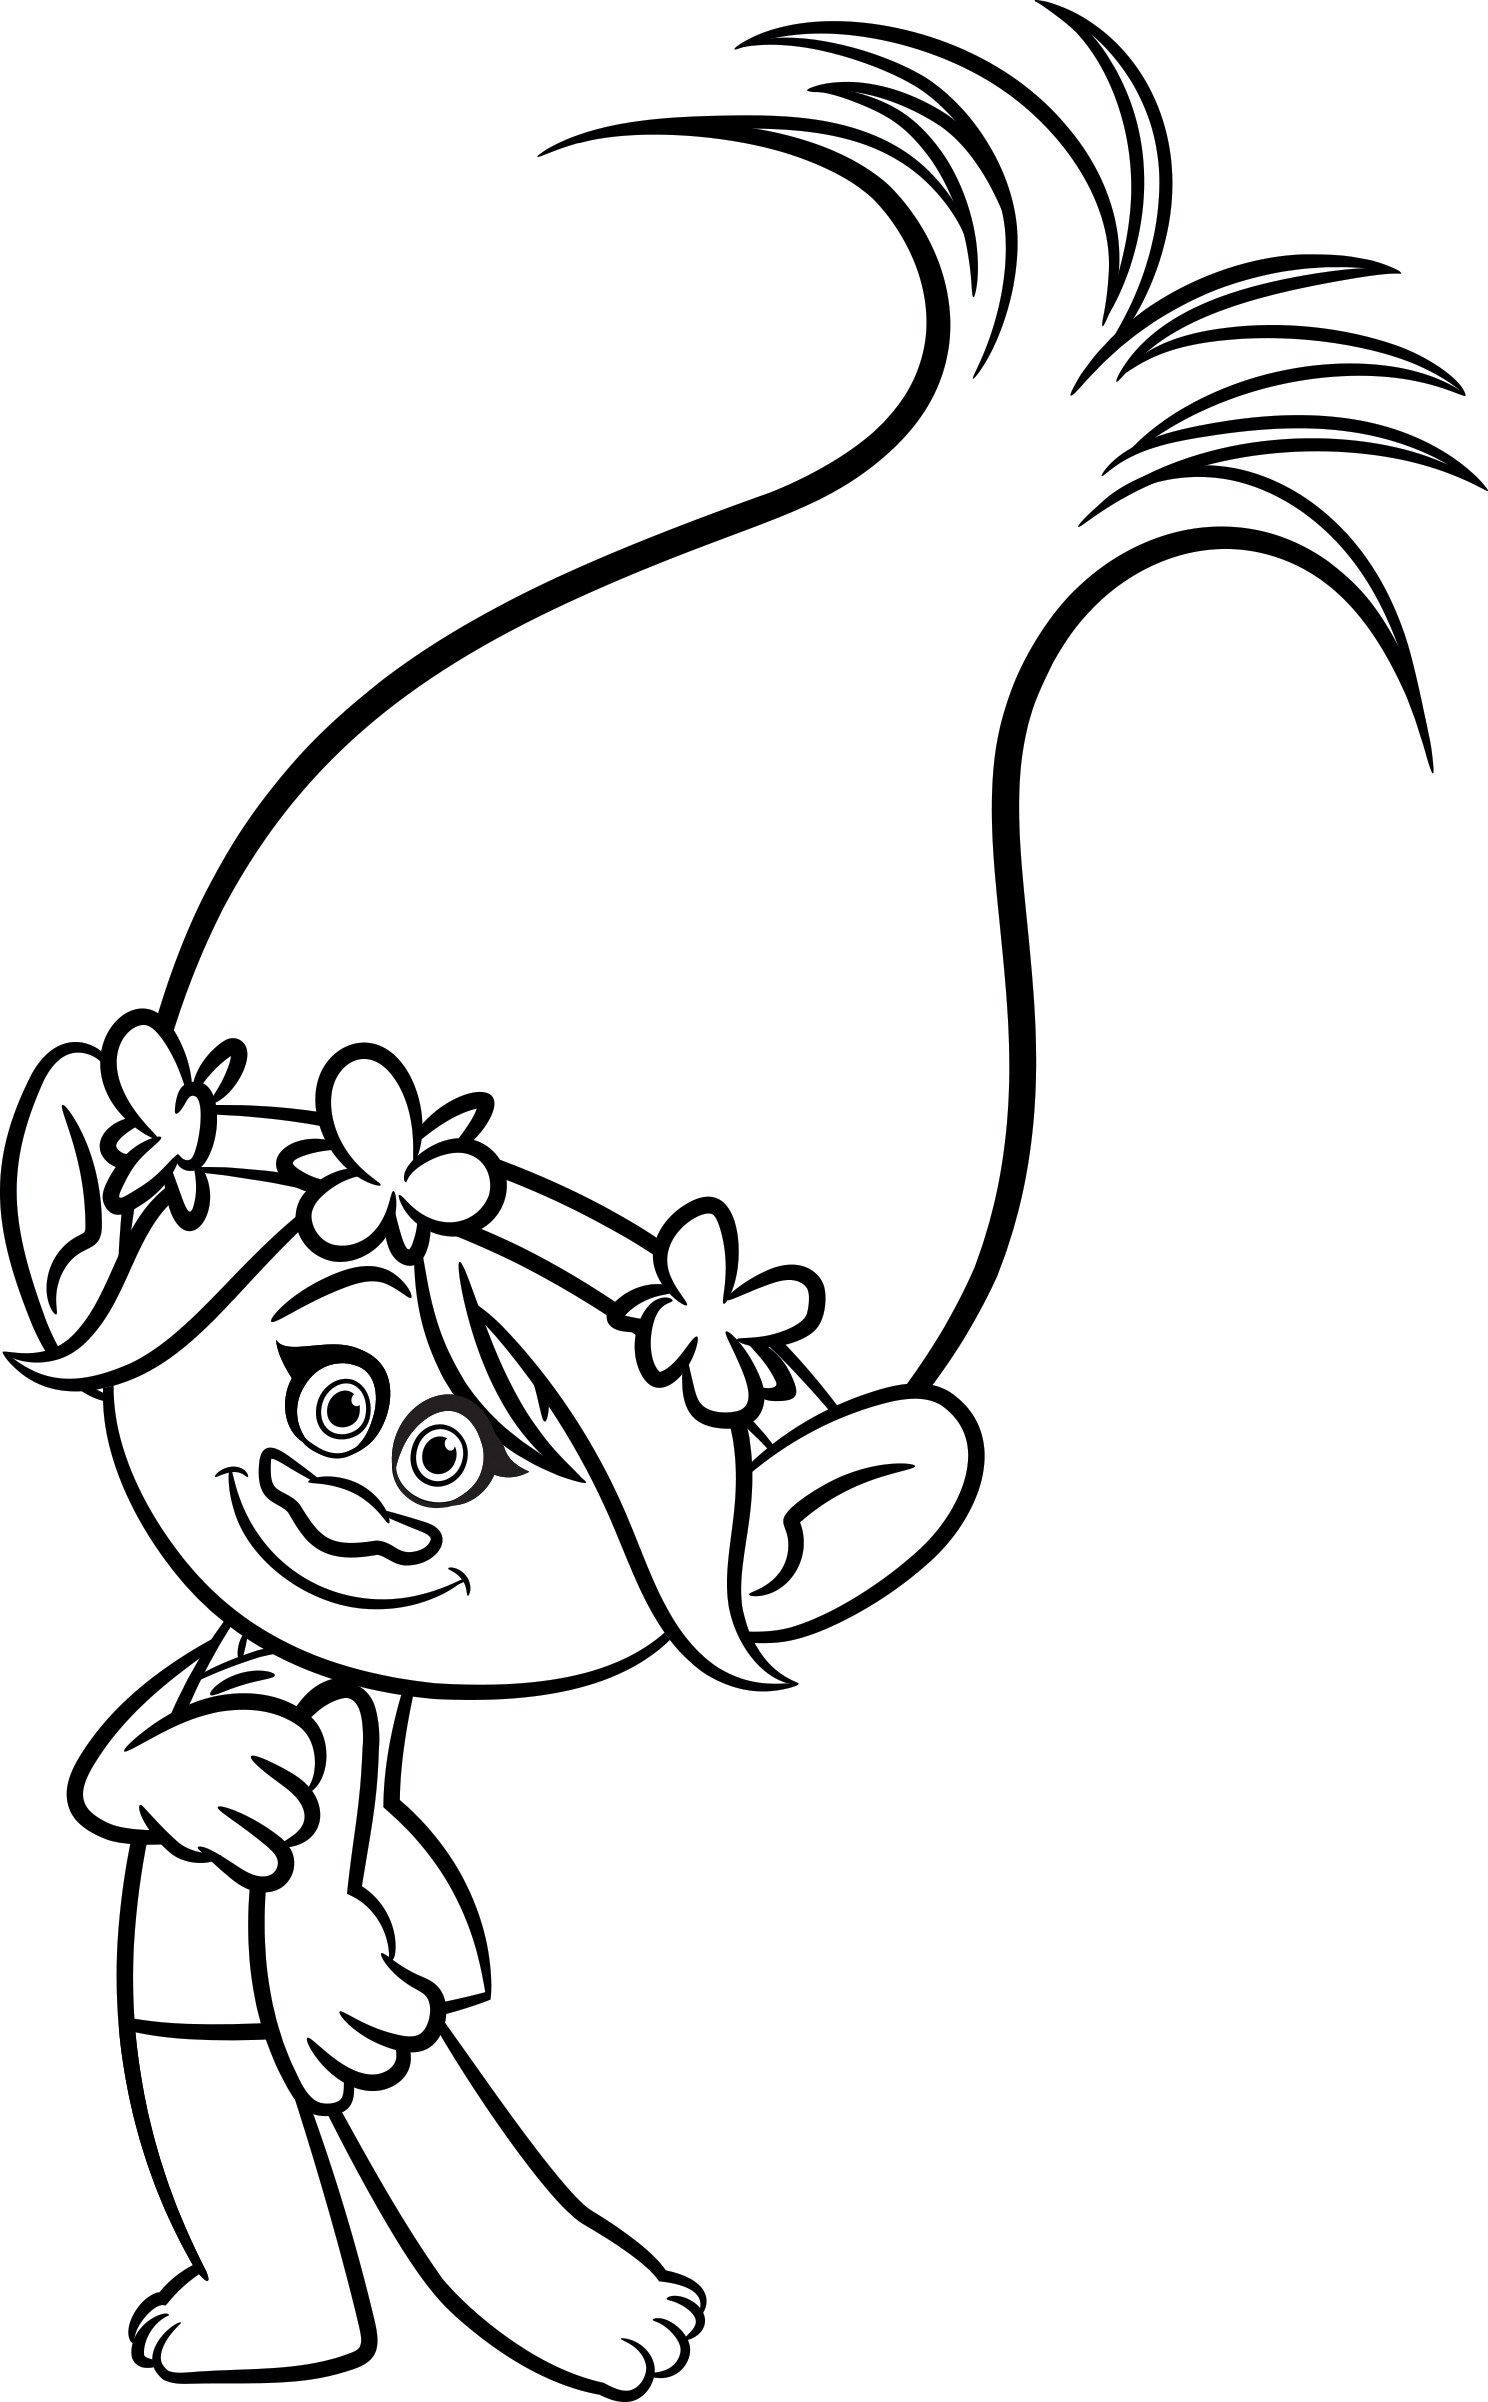 Poppy Troll Coloring Page Free